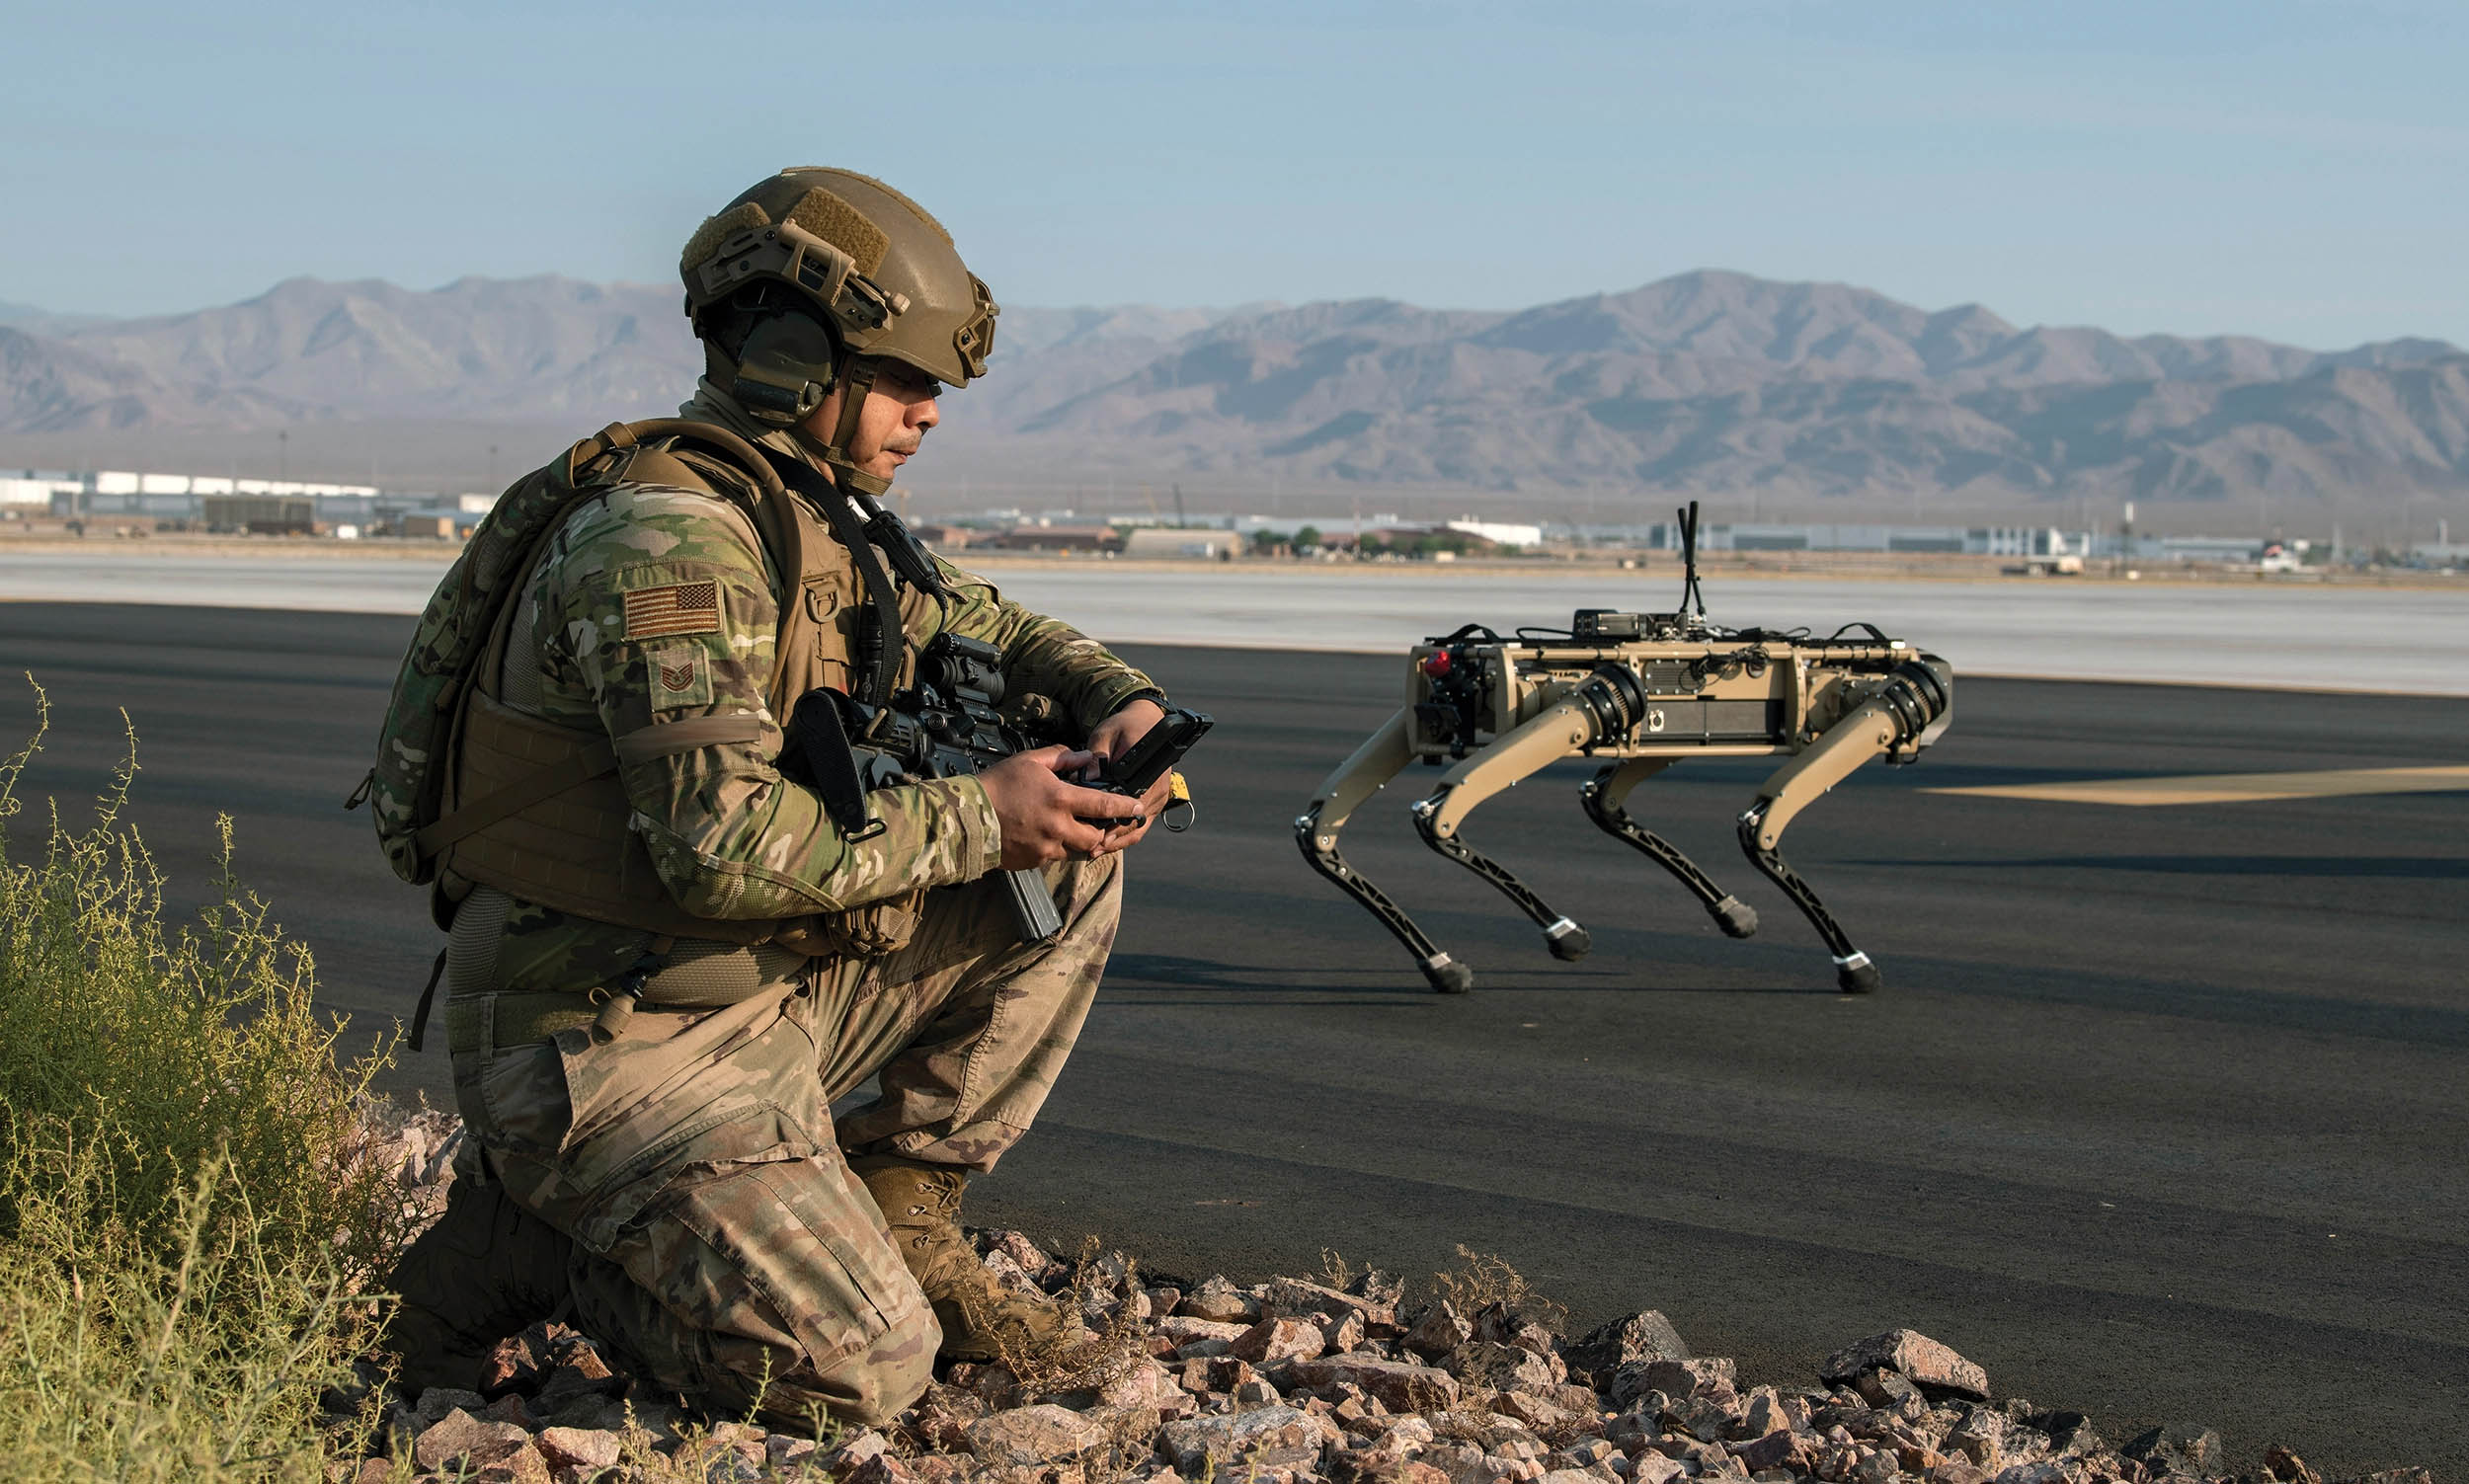 Air Force Technical Sergeant patrols with Ghost Robotics Vision 60 prototype at simulated austere base during Advanced Battle Management System exercise on Nellis Air Force Base, Nevada, September 3, 2020 (U.S. Air Force/Cory D. Payne)